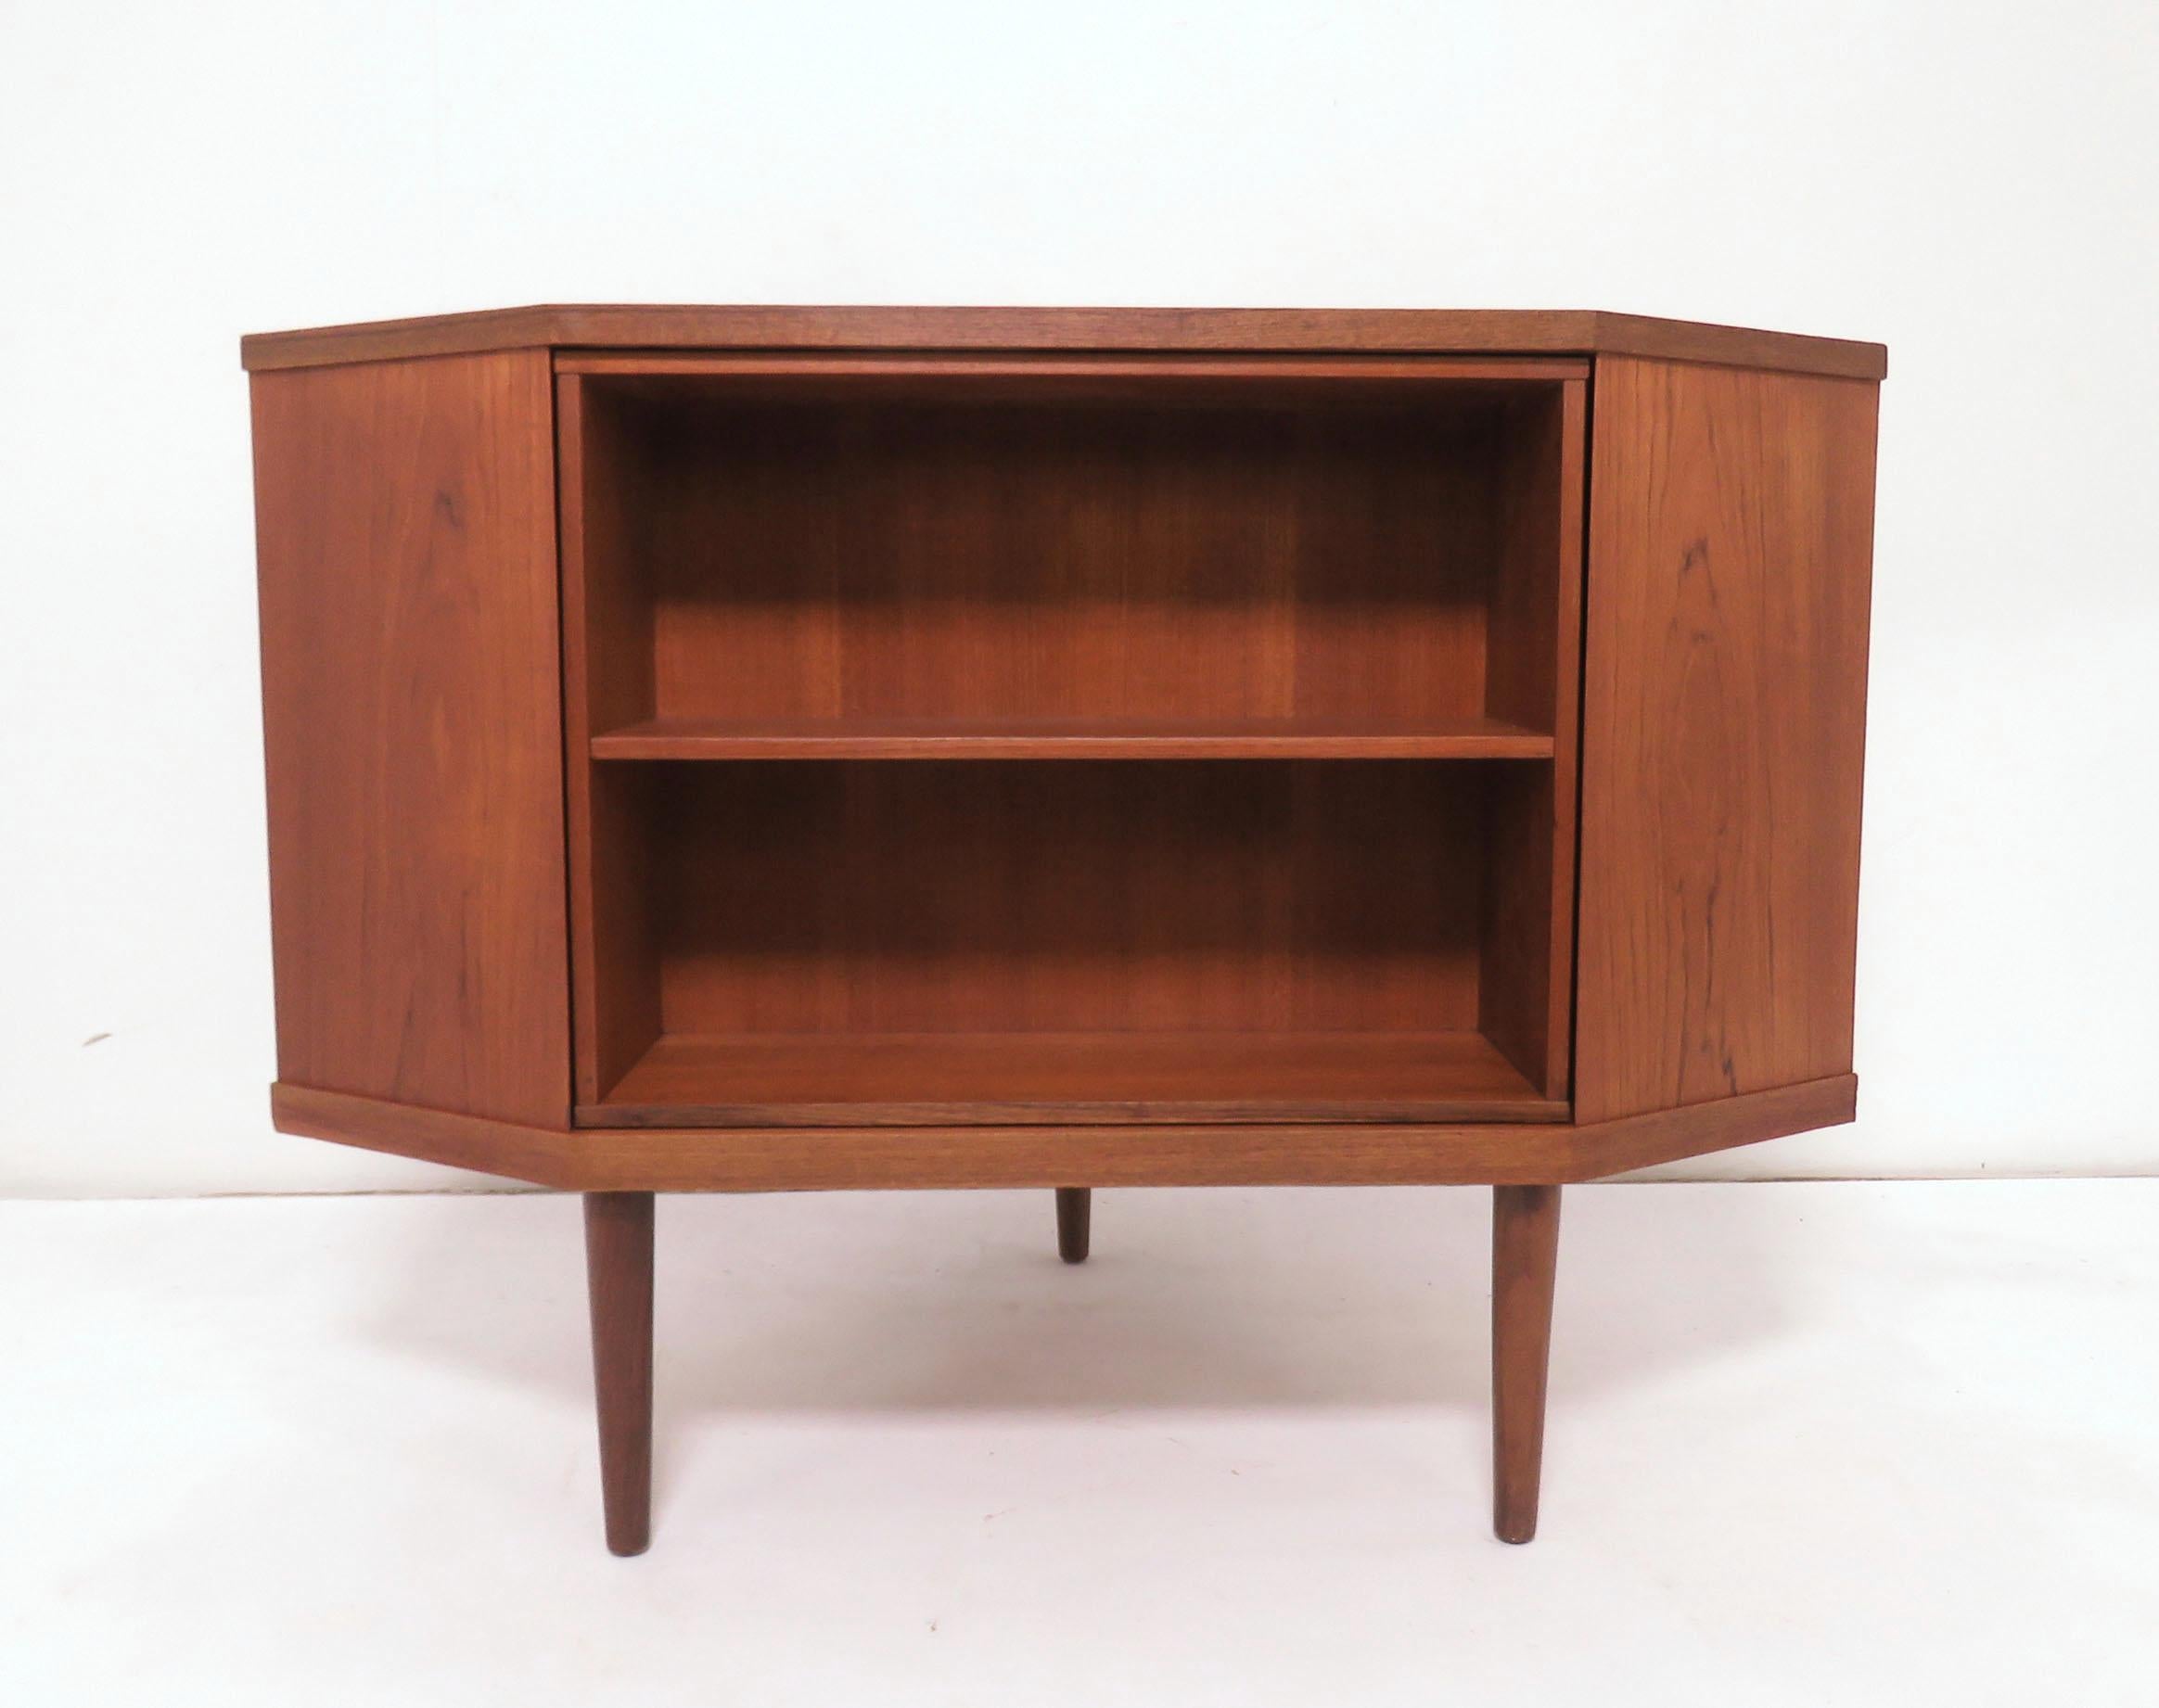 Teak corner cabinet with revolving bookcase, revealing storage for five liquor bottles and stemware, with mirrored back, circa 1960s. In the manner of designs by Torbjorn Afdal of Norway. Would make a wonderful media stand for a flat screen in urban